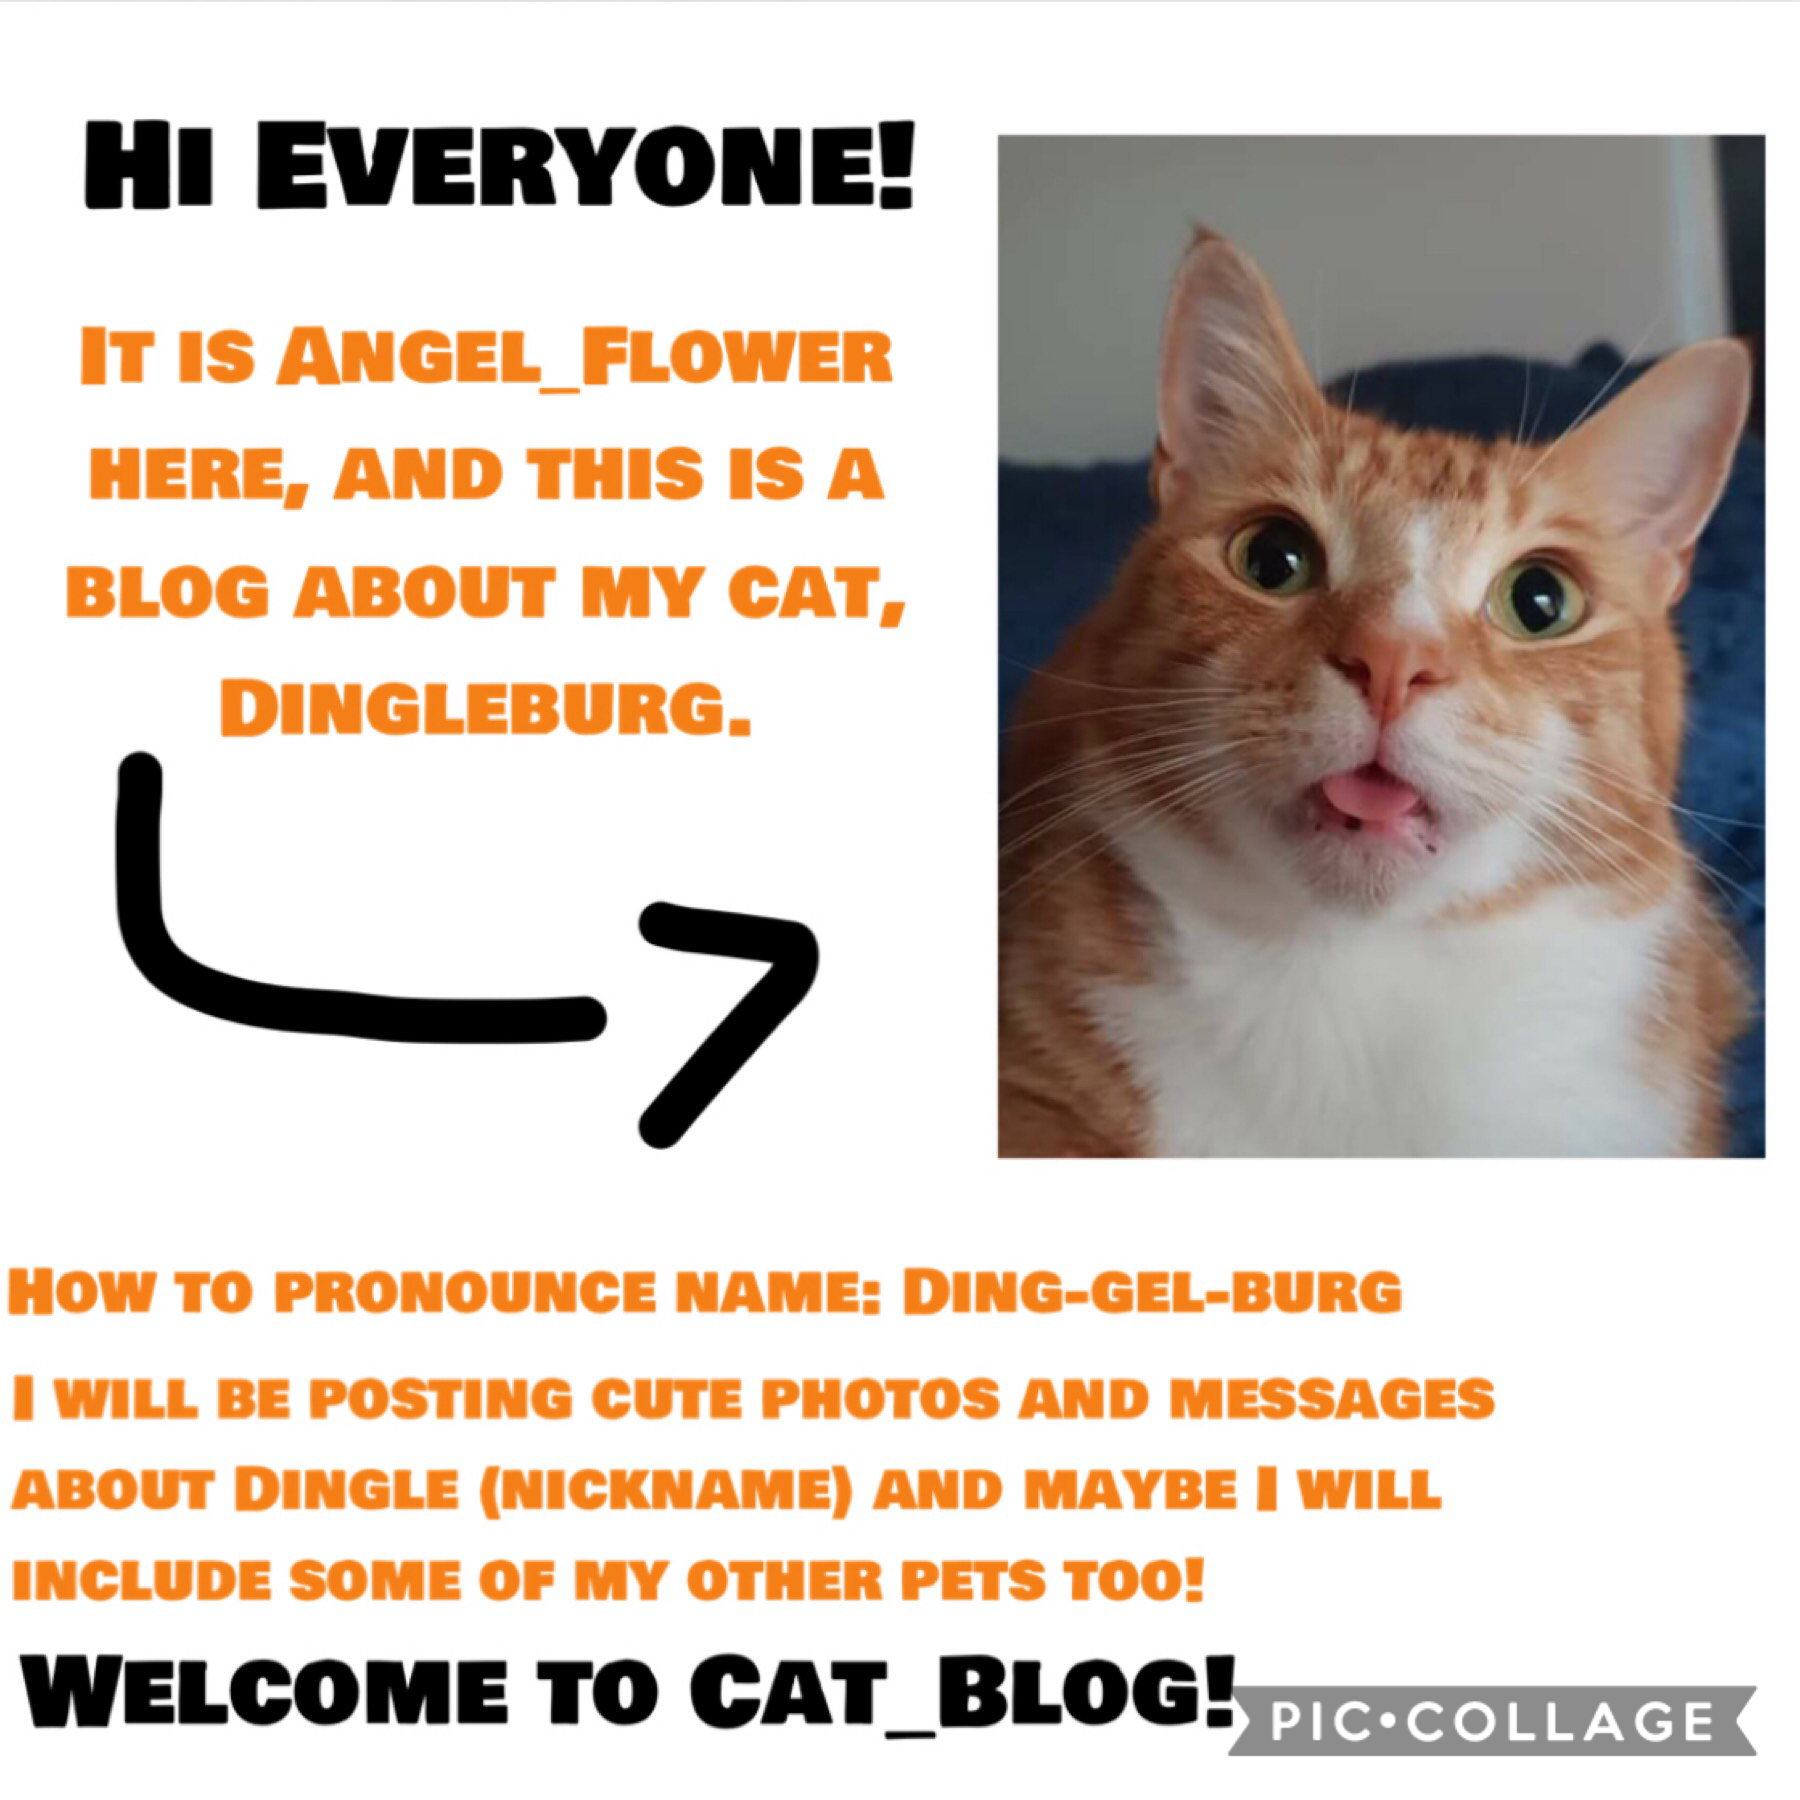 Welcome to Cat_Blog!